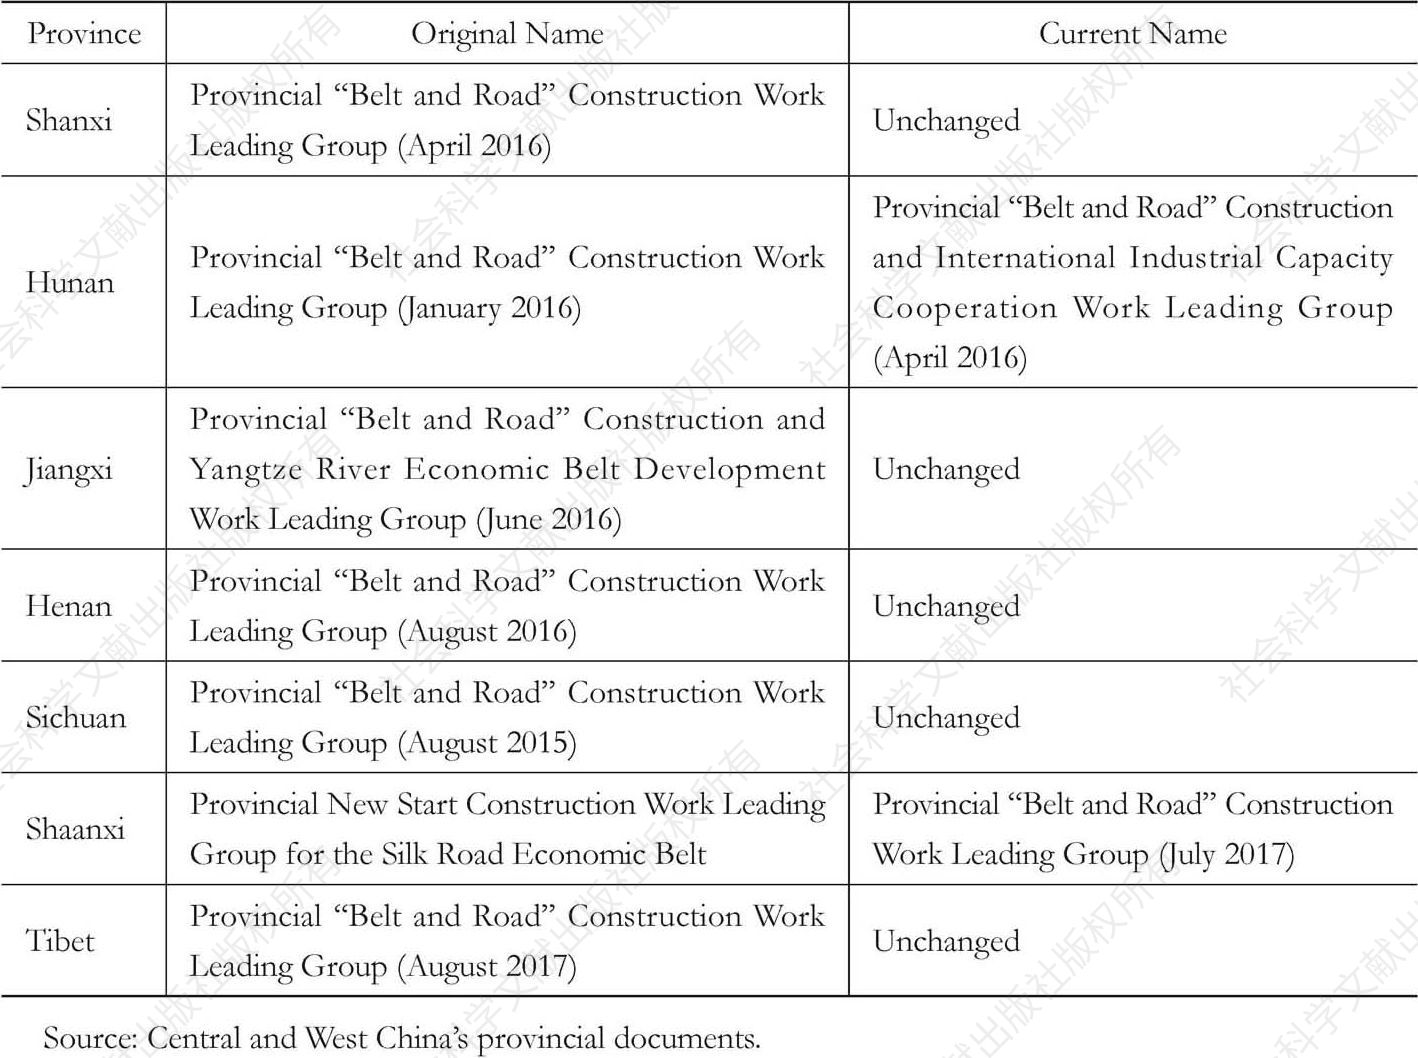 Table 2 Names of Some Central and West China’s Coordination Departments for the “Belt and Road” Construction